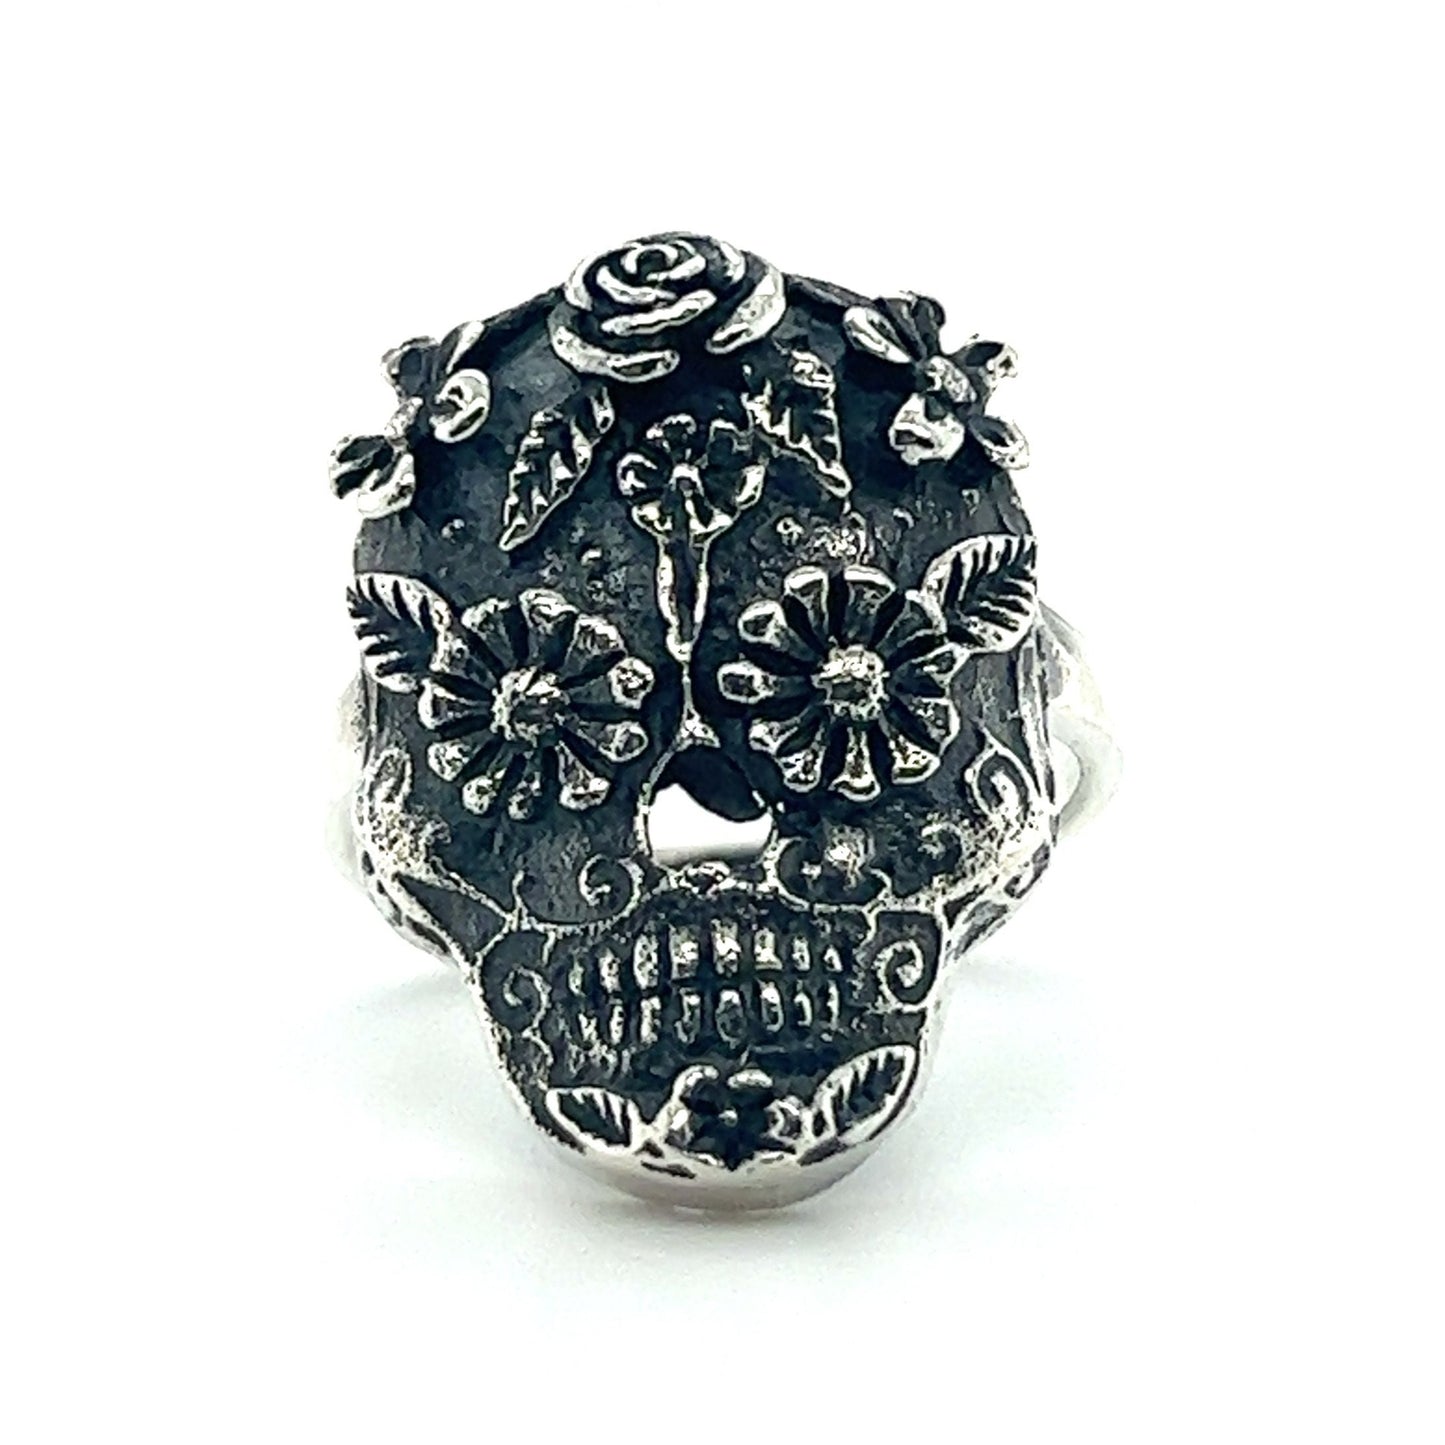 A sterling silver Intricate Sugar Skull Ring with gothic flowers.